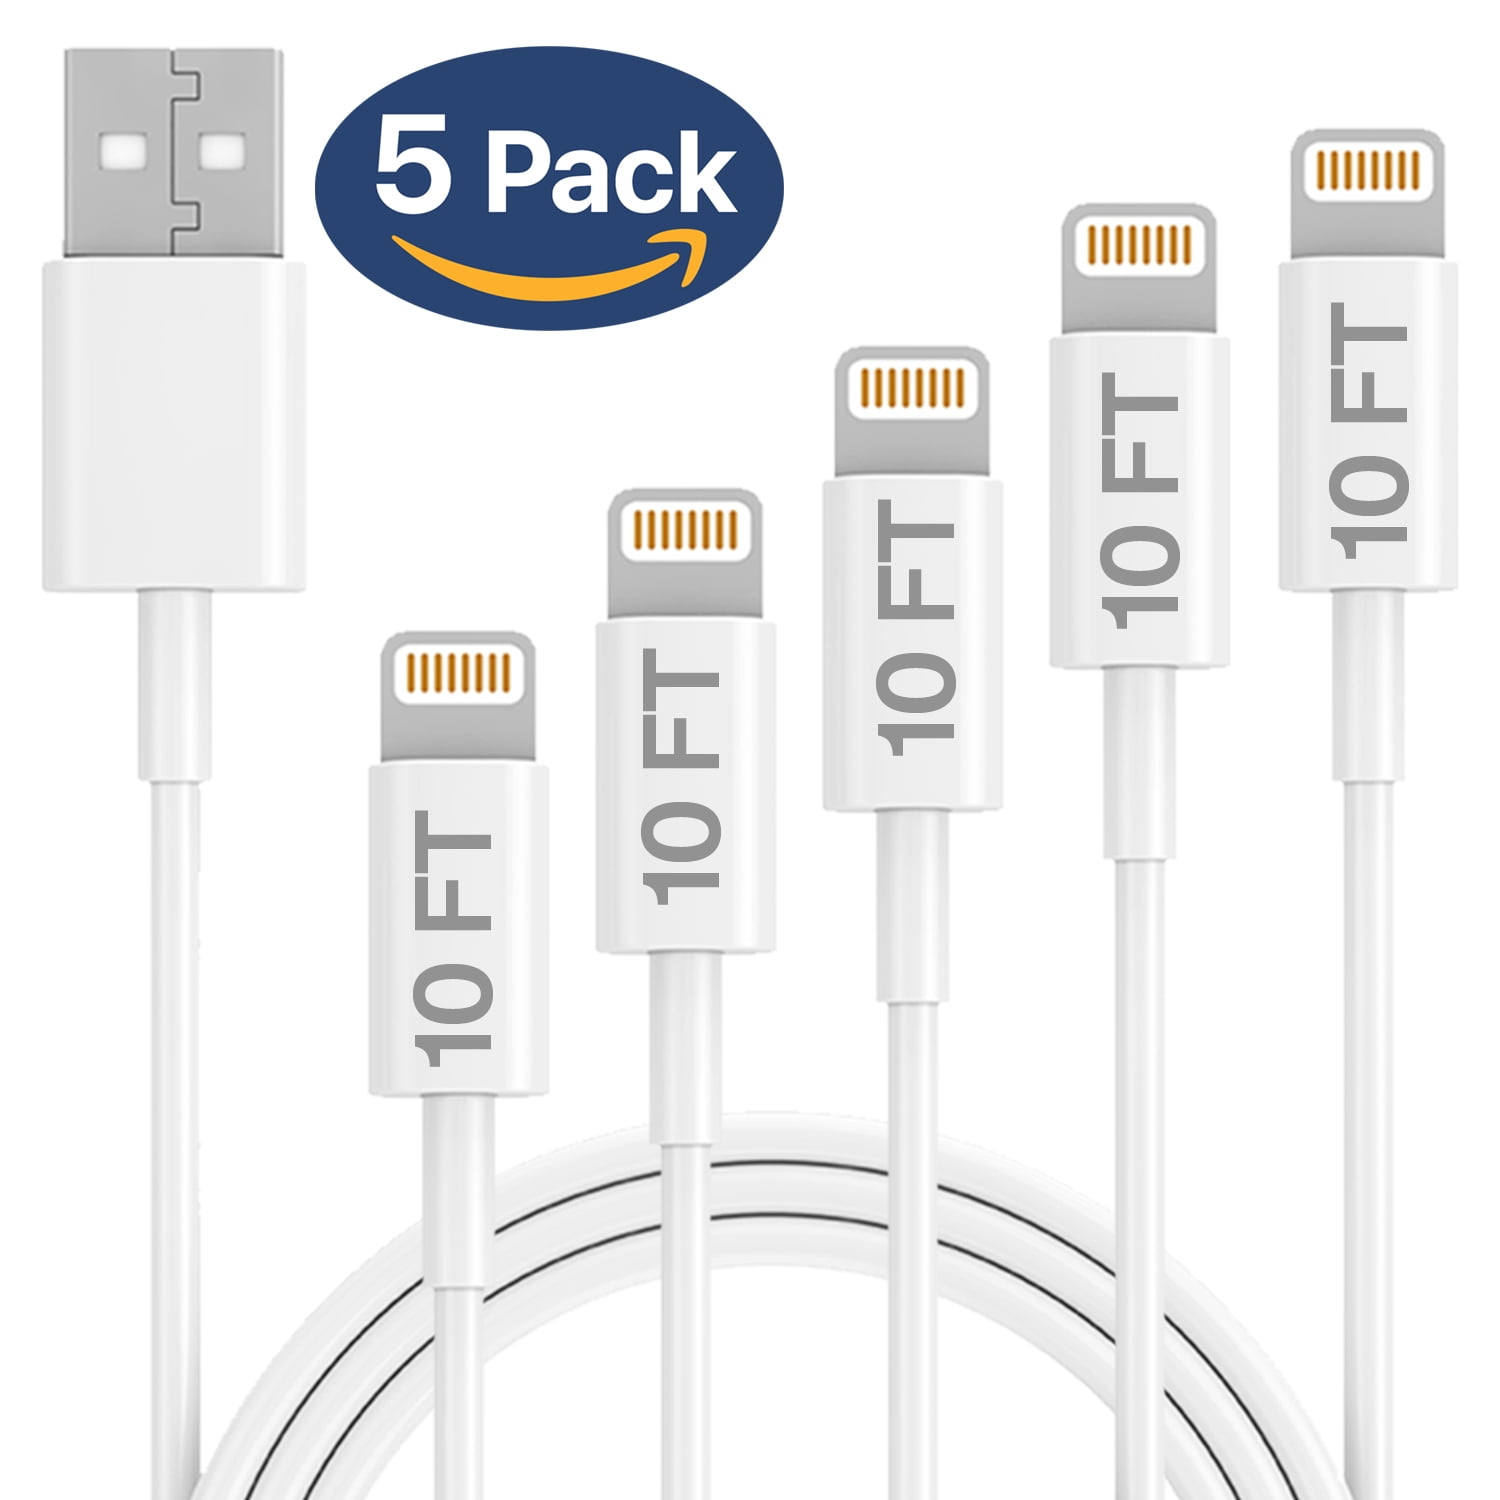 iPhone Lightning Cable 5 Pack 10FT USB Cable Infinite Power Compatible with Apple iPhone Xs,Xs Max,XR,X,8,8 Plus,7,7 Plus,6S,6S Plus,iPad Air,Mini,iPod Touch,Case Certified Charging & Syncing Cord